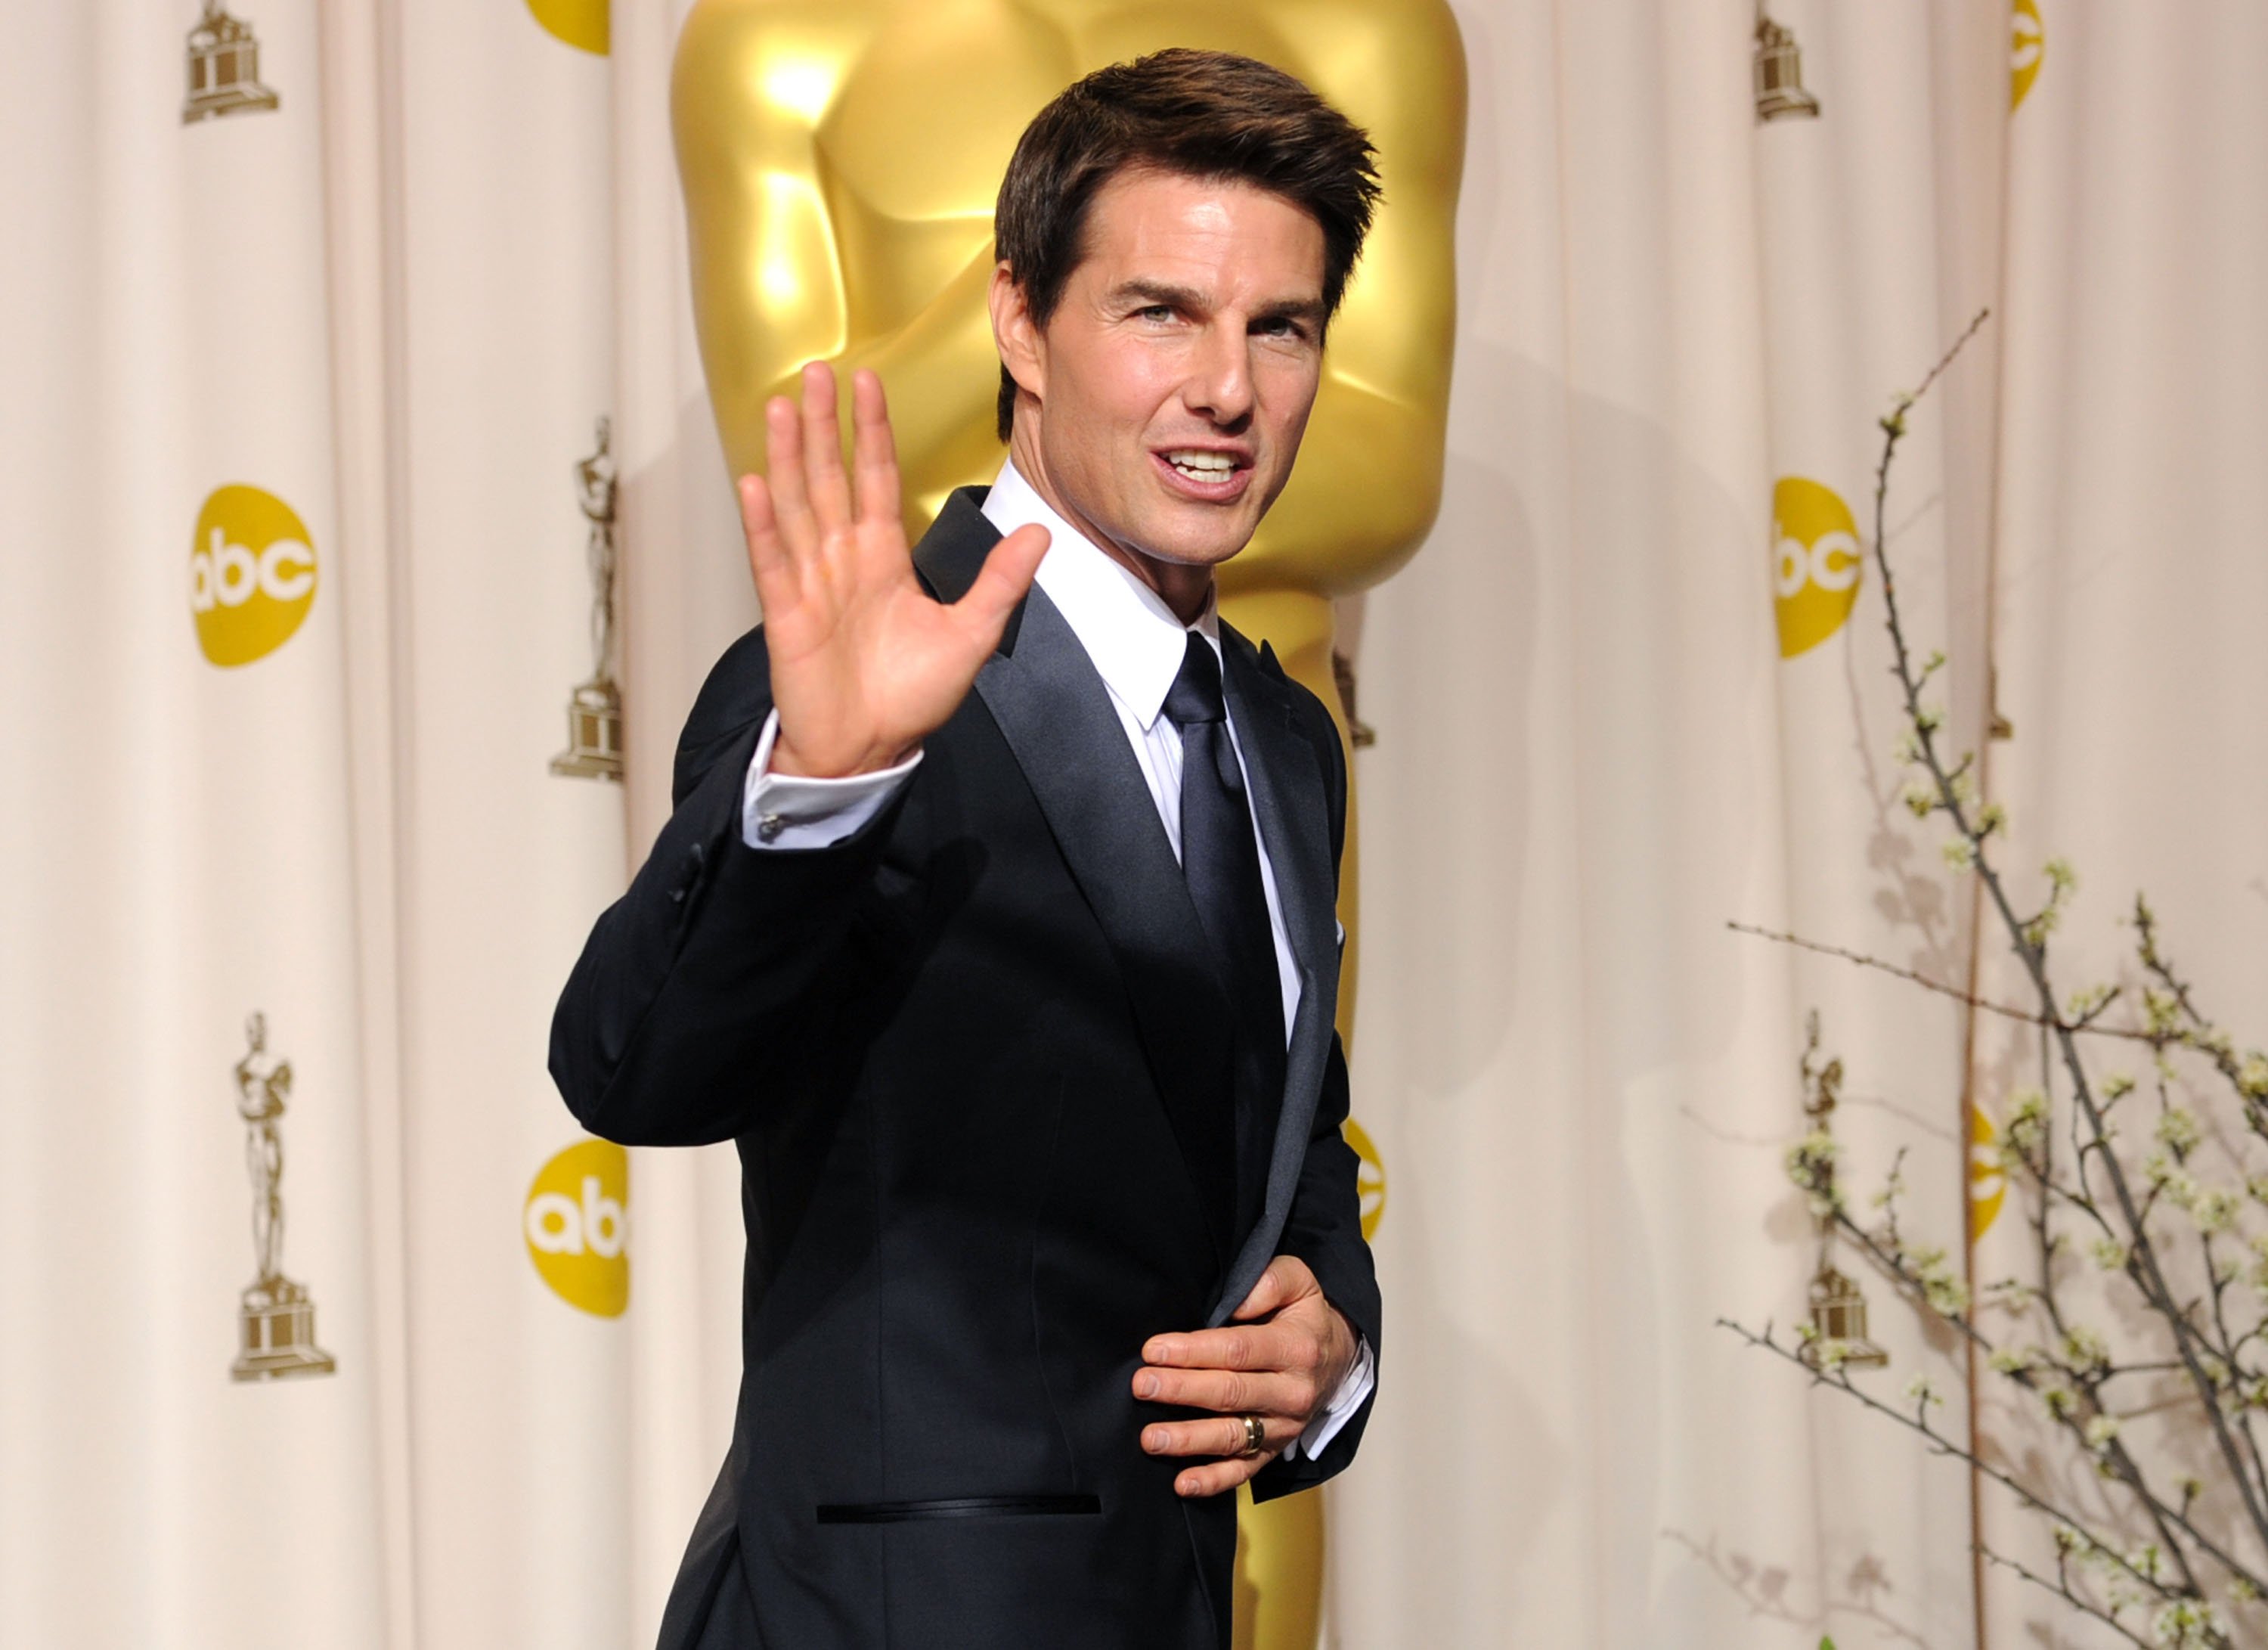 Action star Tom Cruise faces the press during the 2012 Annual Academy Awards in Hollywood, California. | Photo: Getty Images